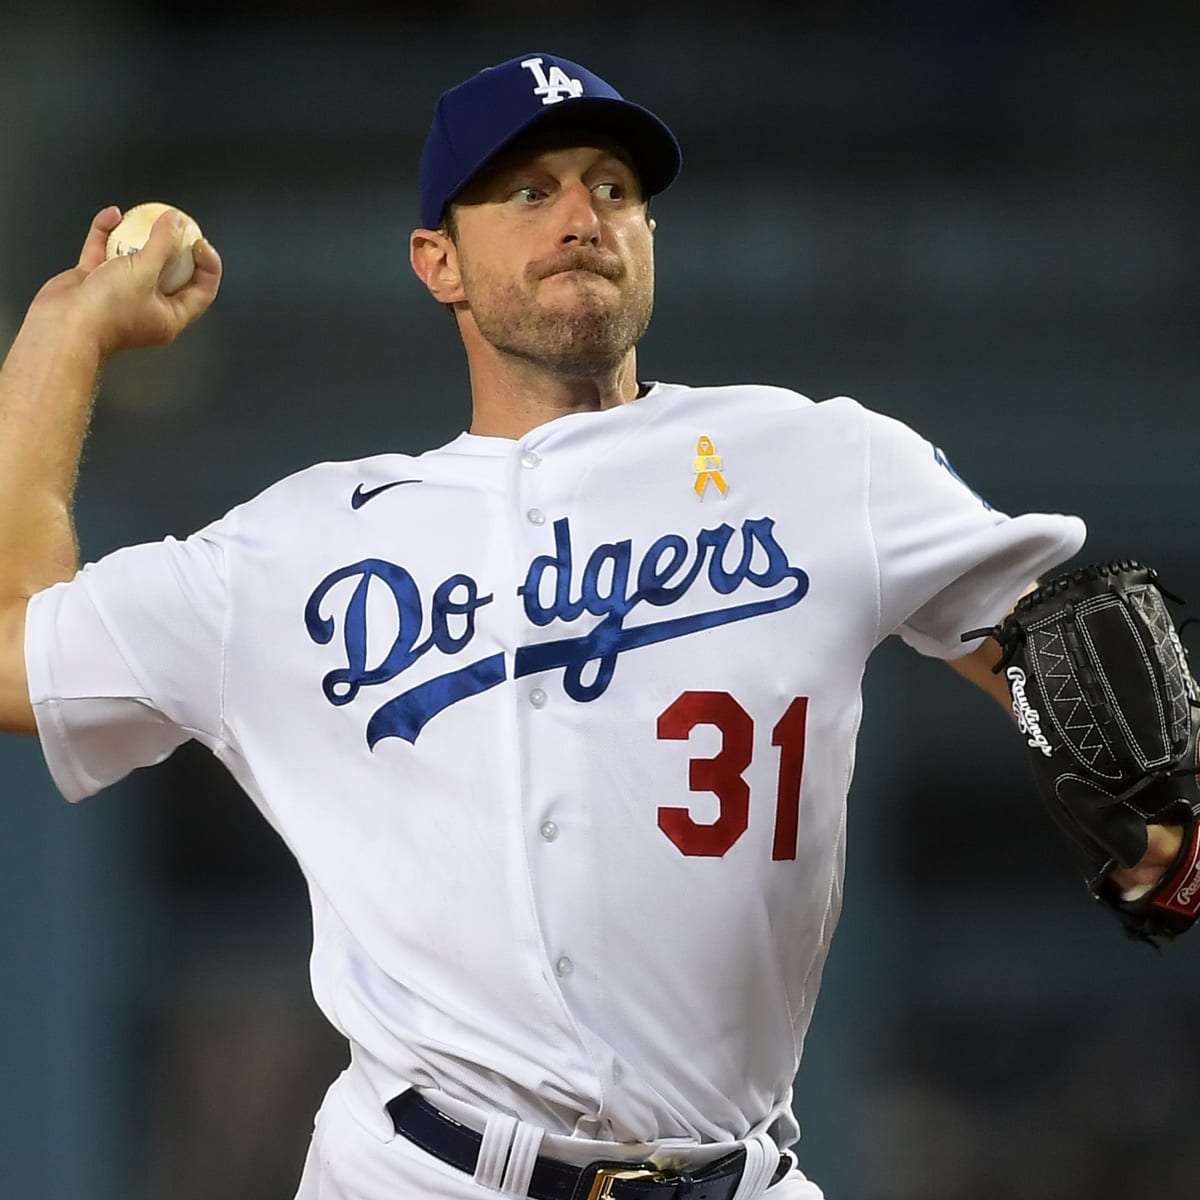 Max Scherzer Stifles the Dodgers in a Rare Relief Outing - The New